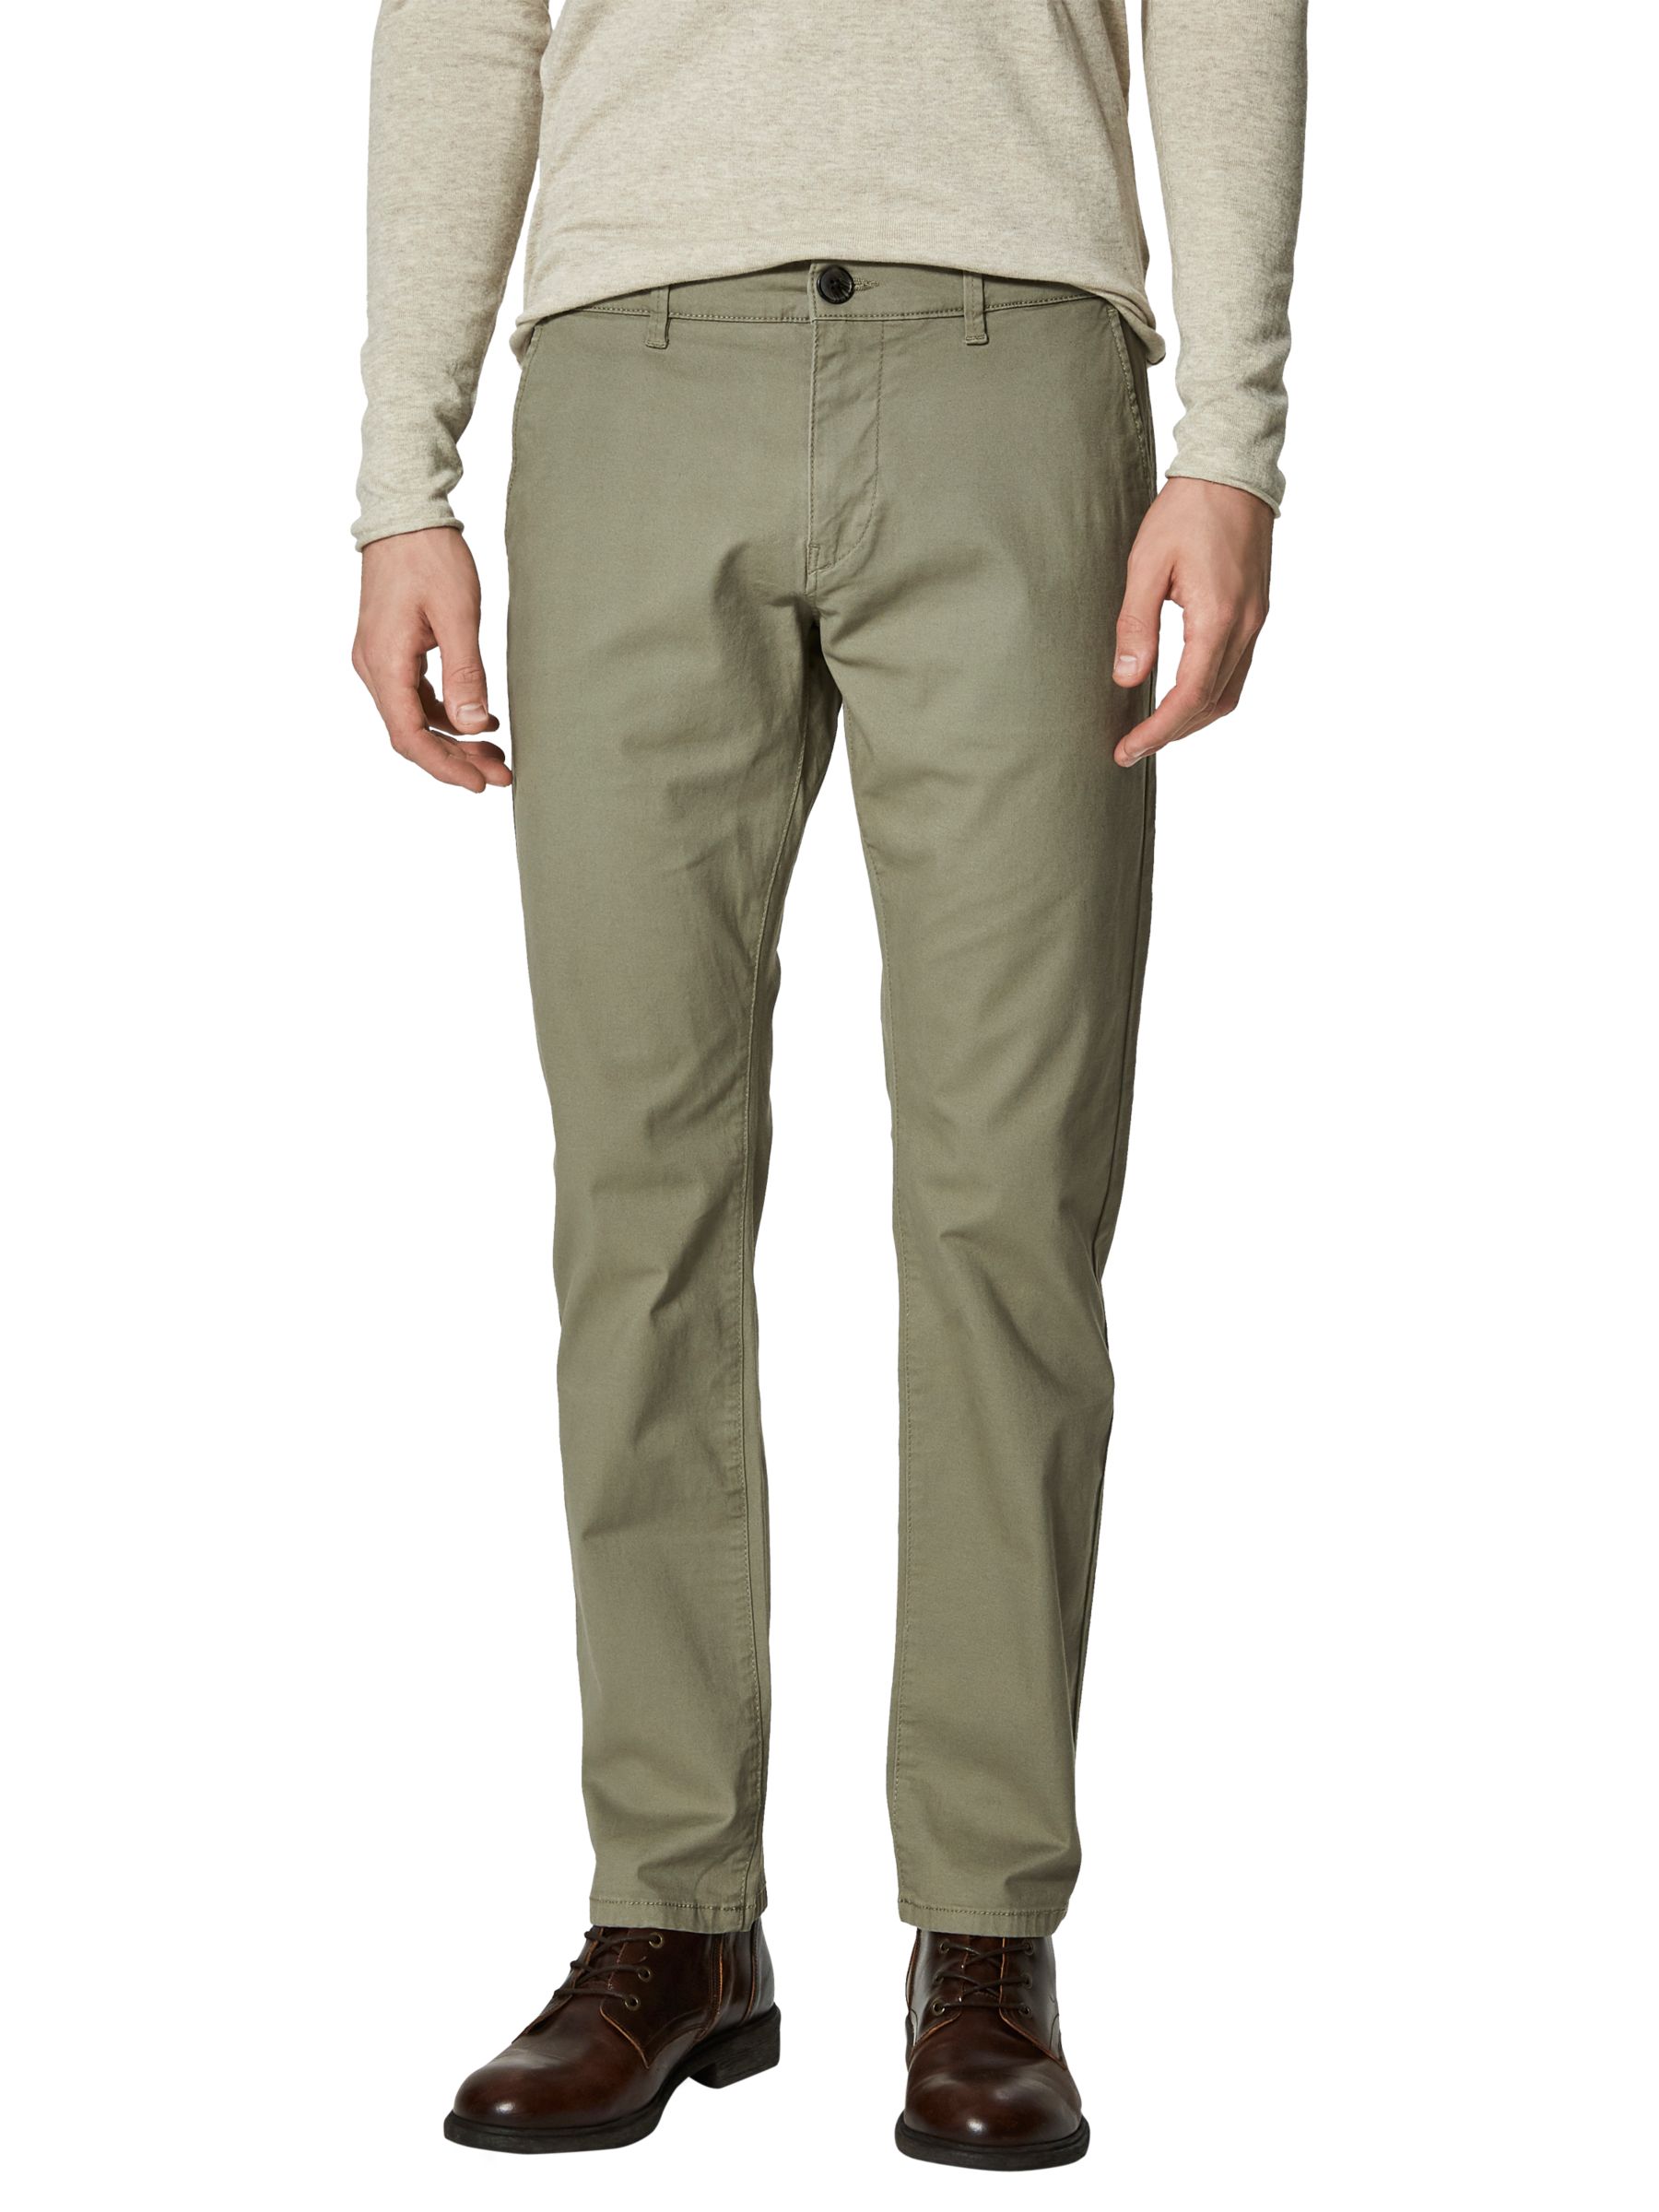 Selected Homme Three Paris Stretch Chinos, Vetiver, 30R